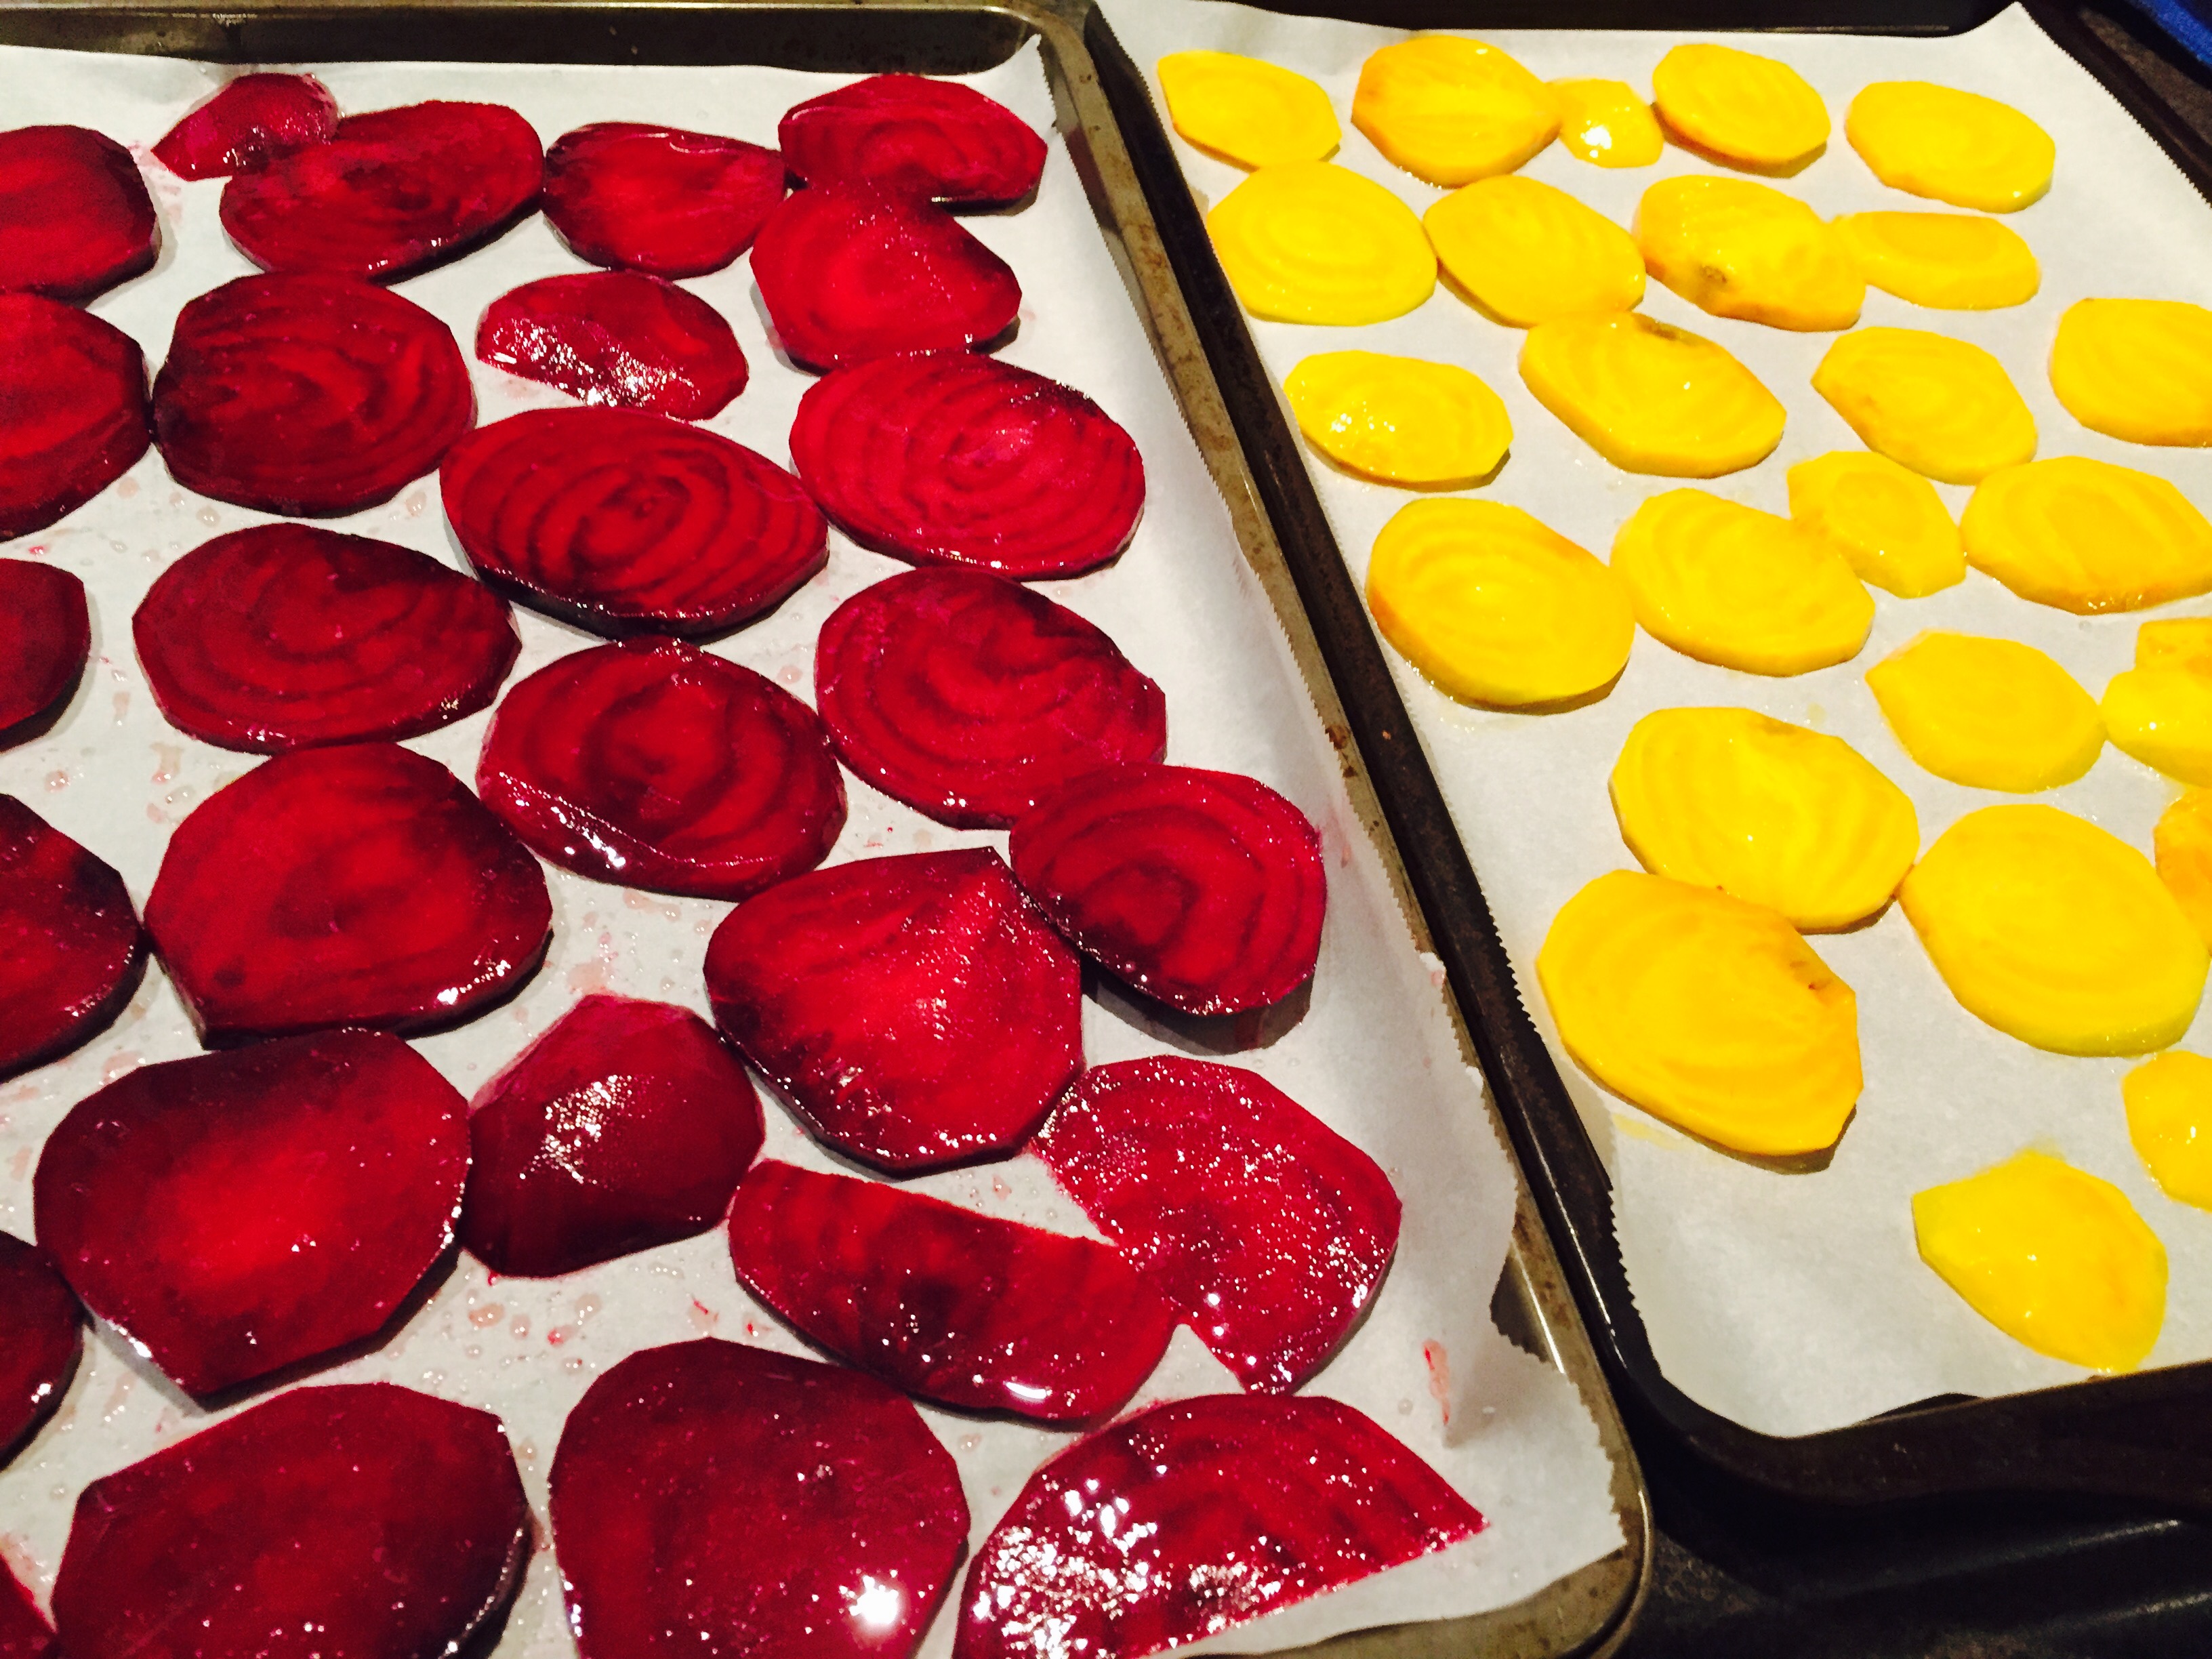 Sliced red beets and yellow beets seasoned and ready for roasting